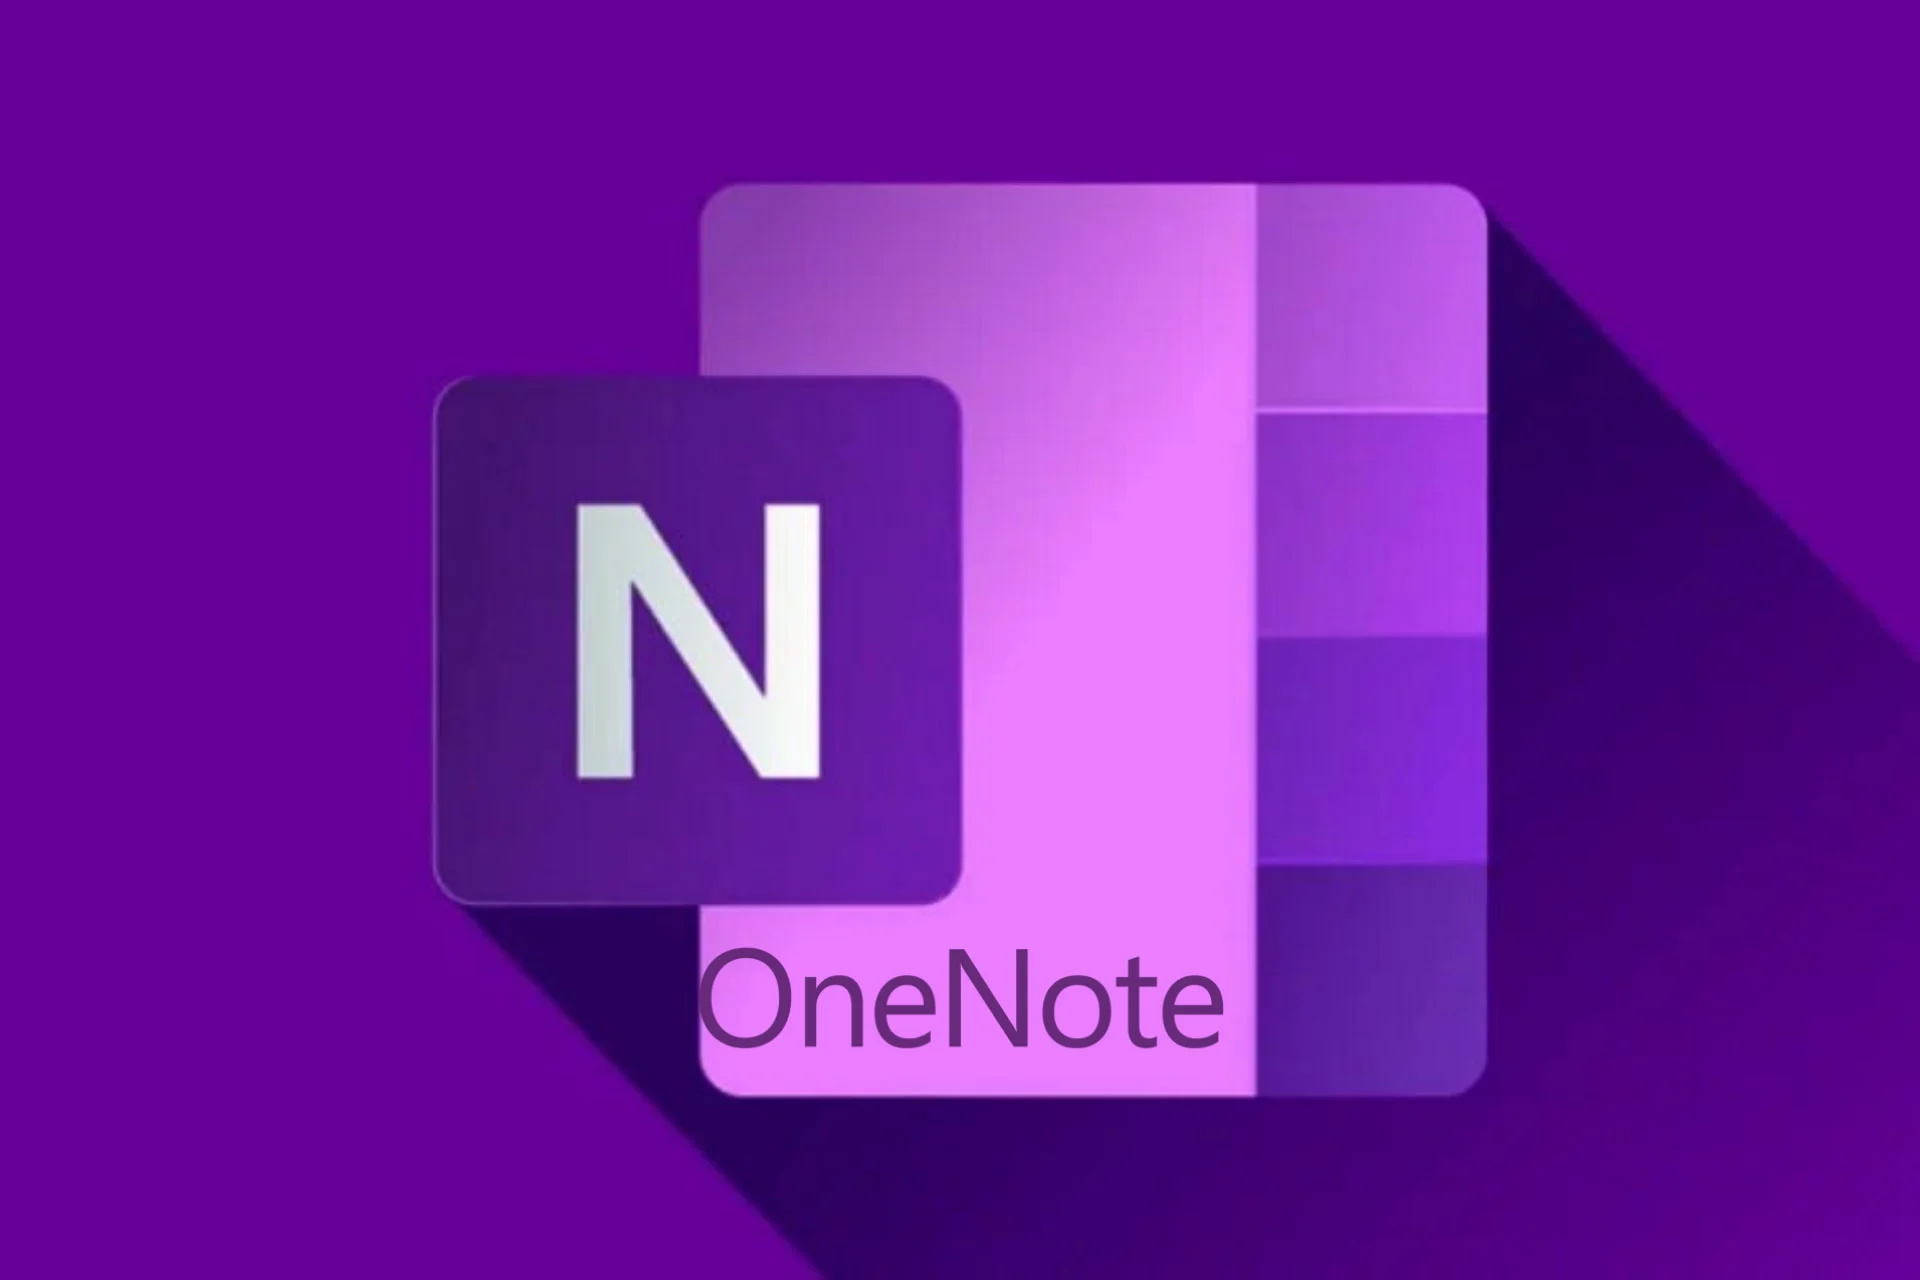 Microsoft tests new OneNote Quick Note experiences